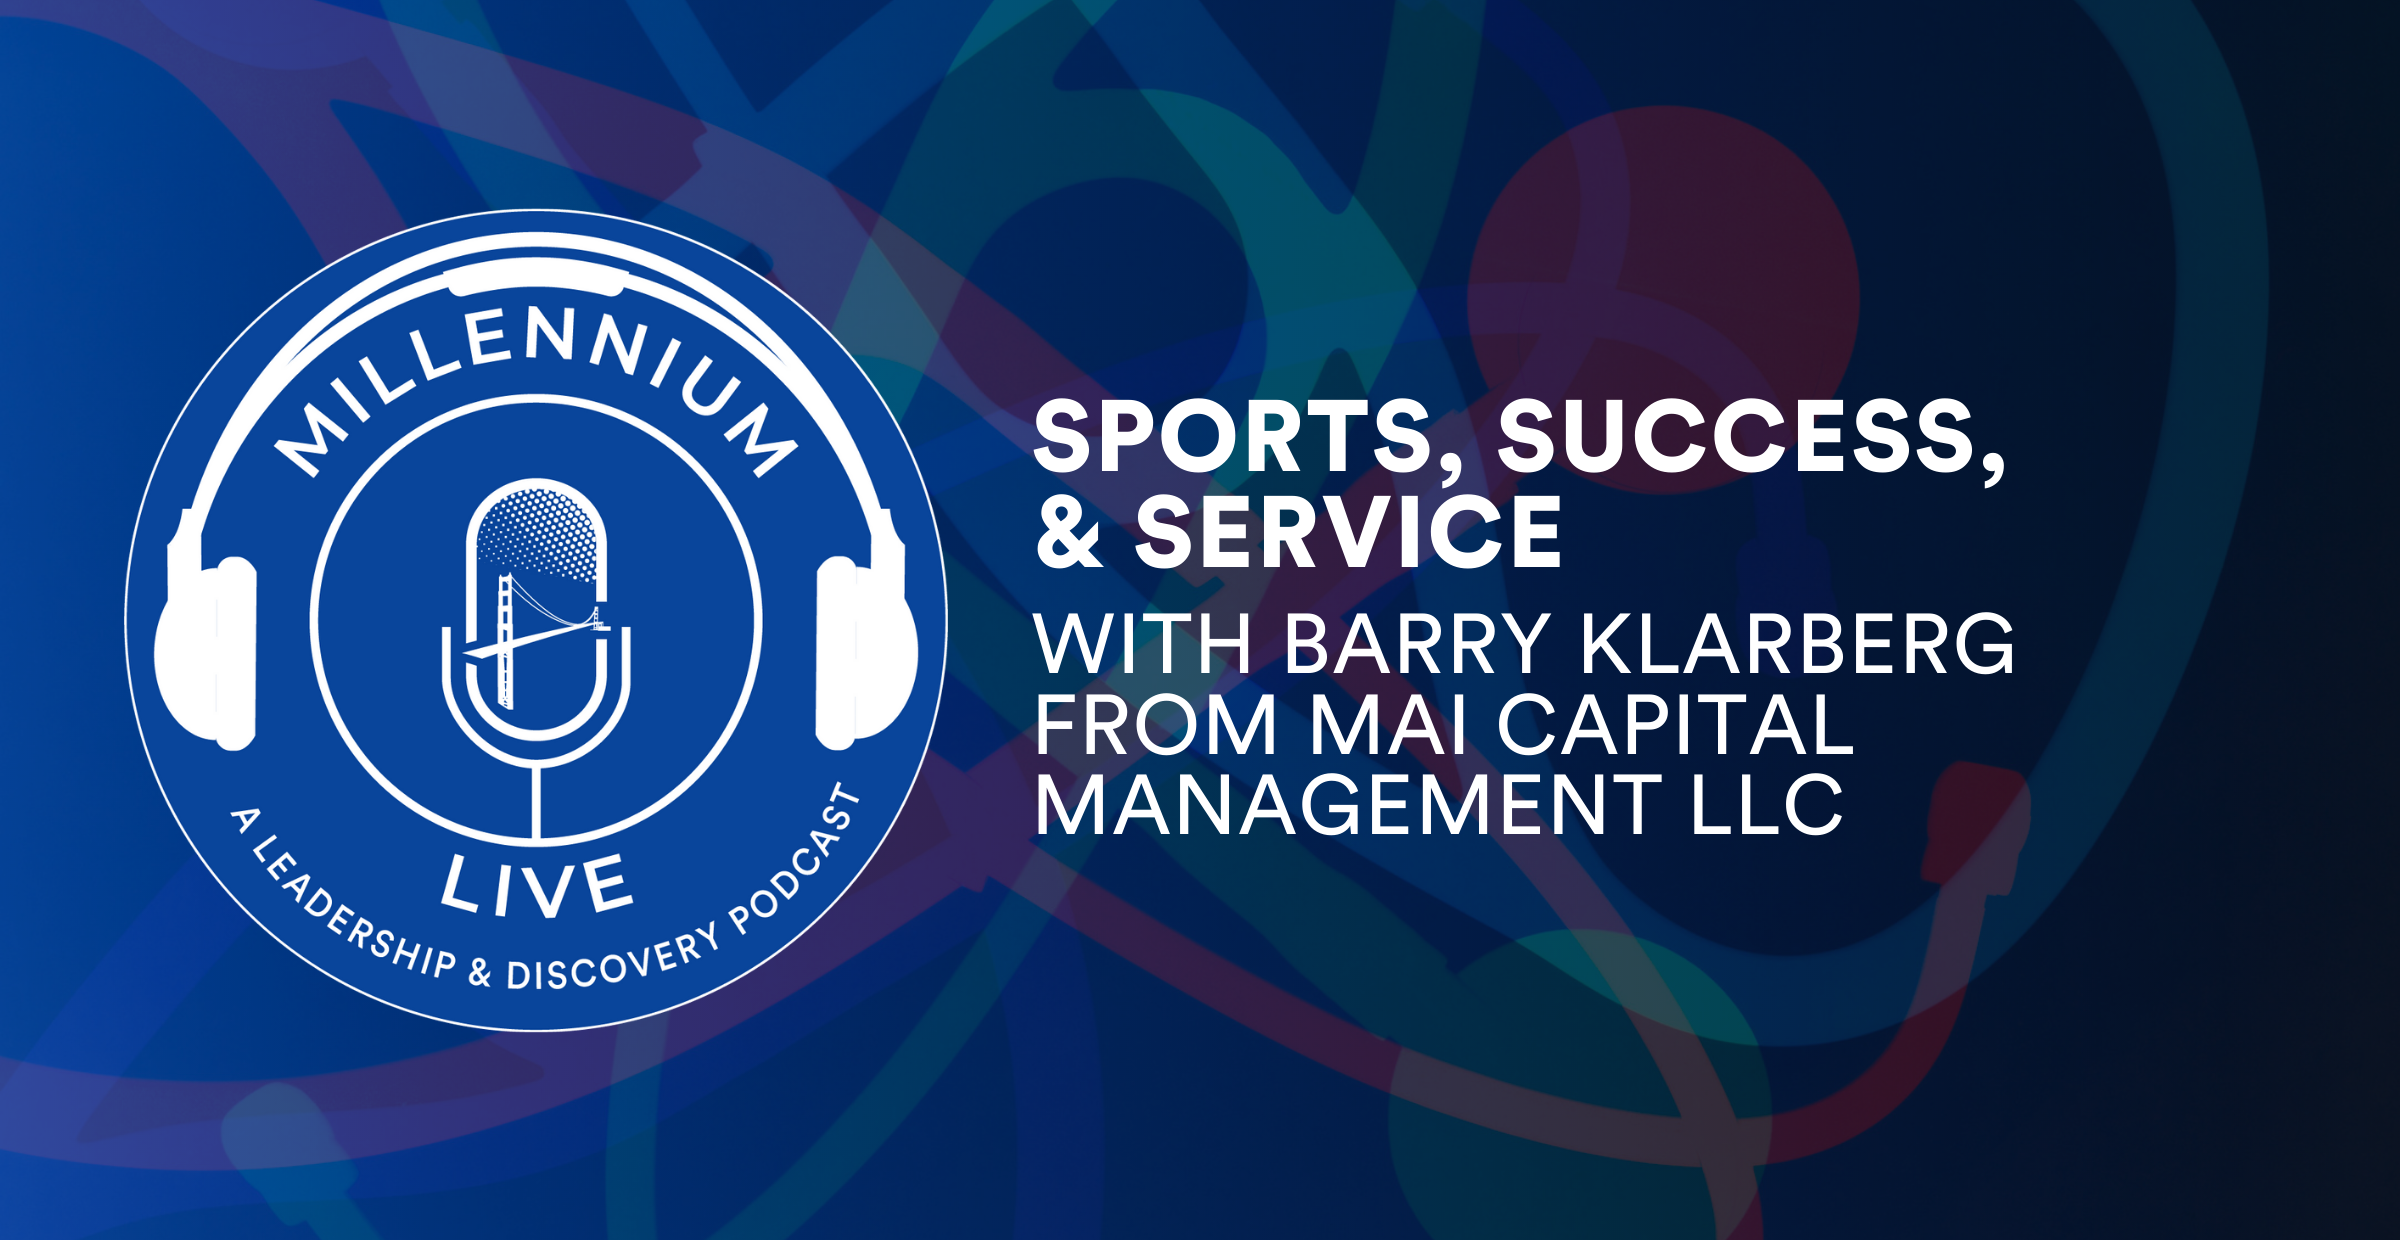 #MillenniumLive on Sports, Success, and Service with Barry Klarberg